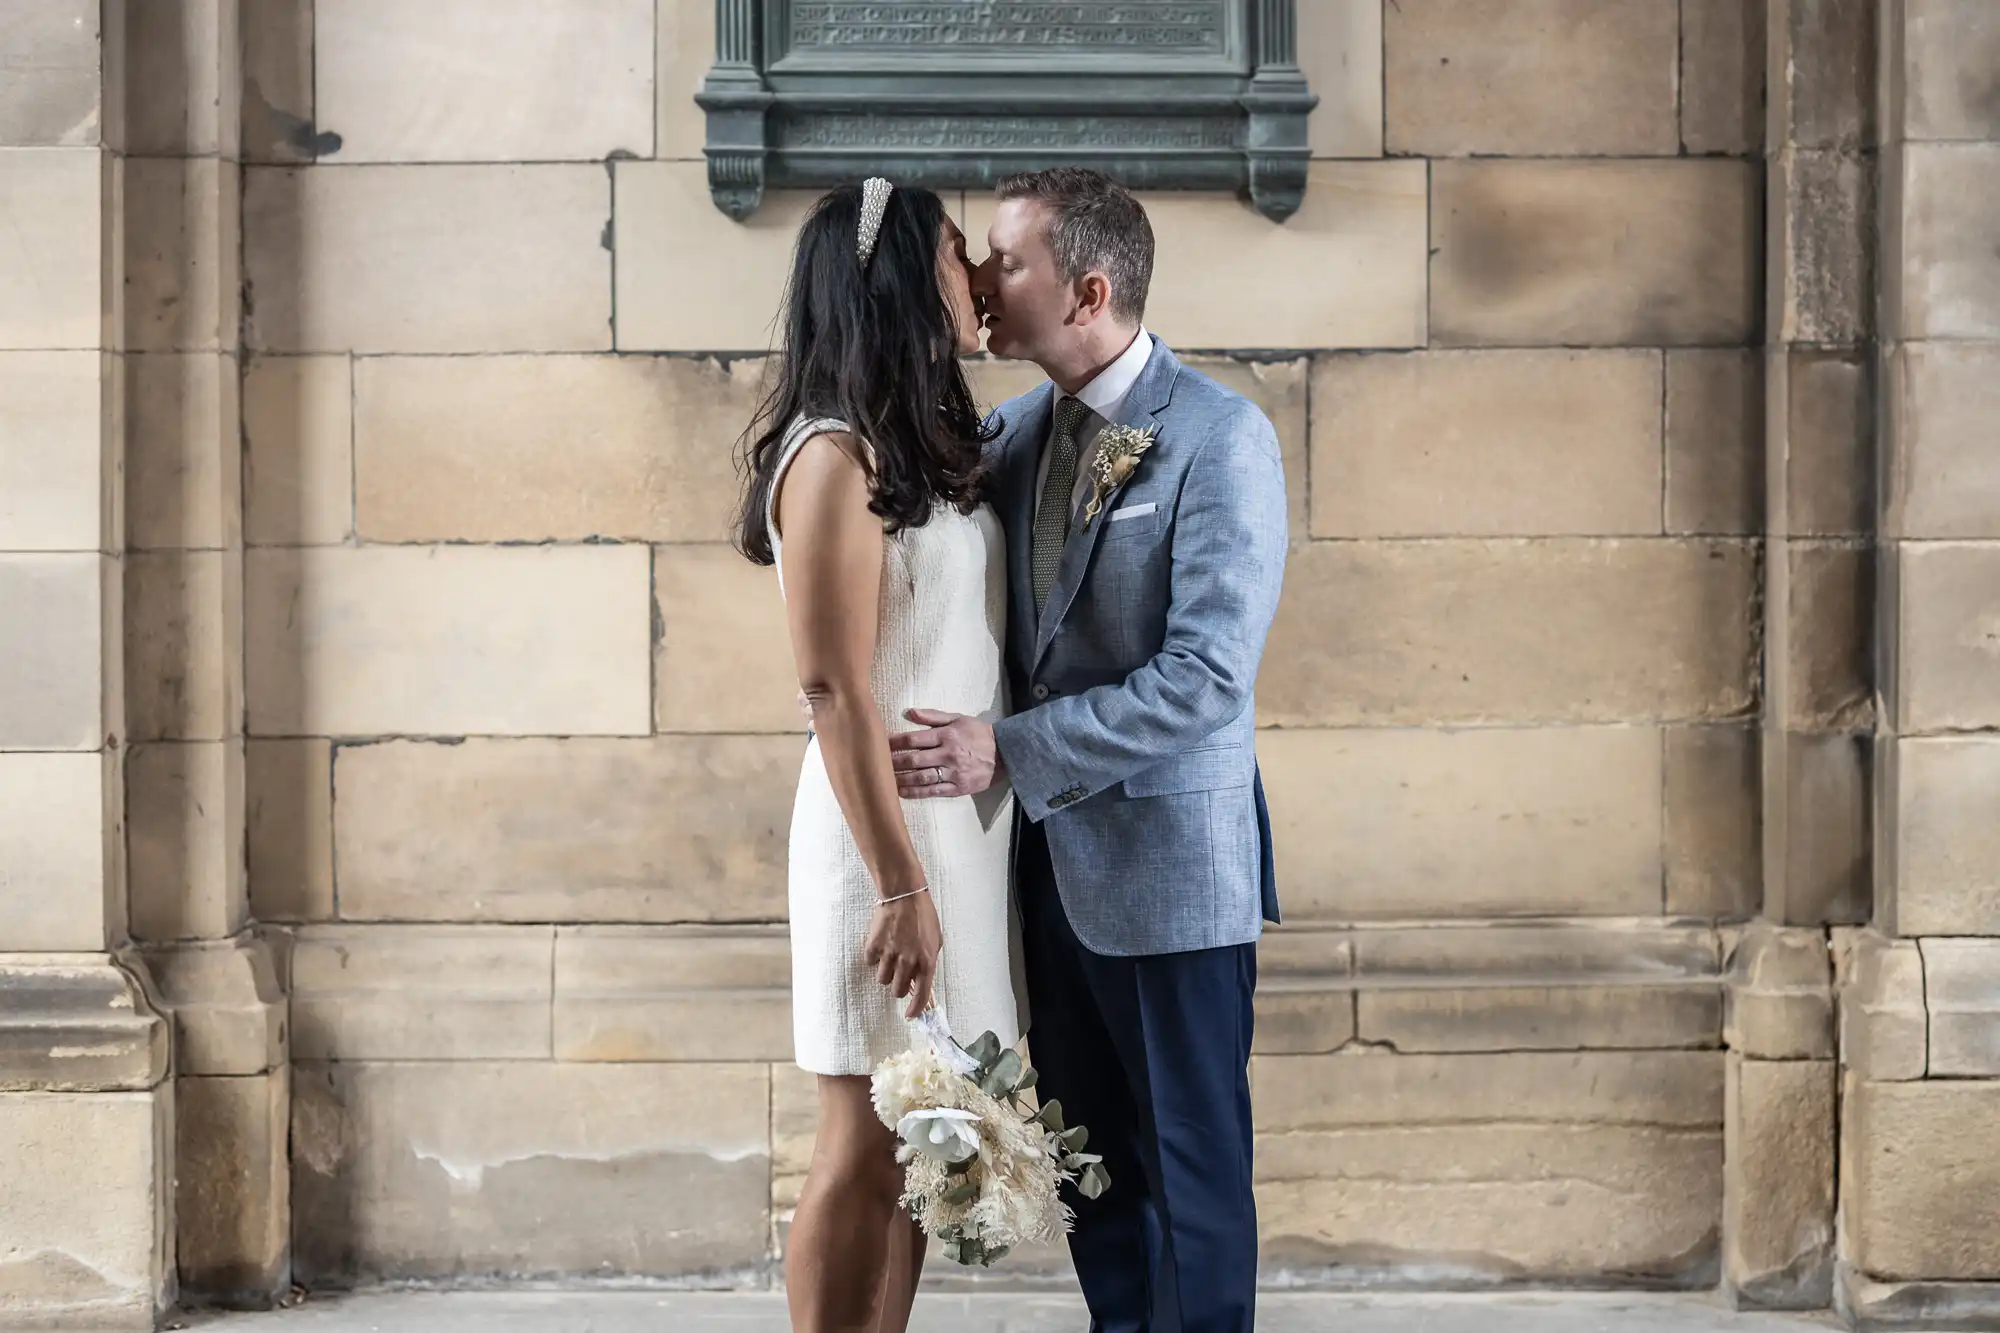 A couple dressed in wedding attire kisses in front of a stone wall. The woman holds a bouquet of flowers.